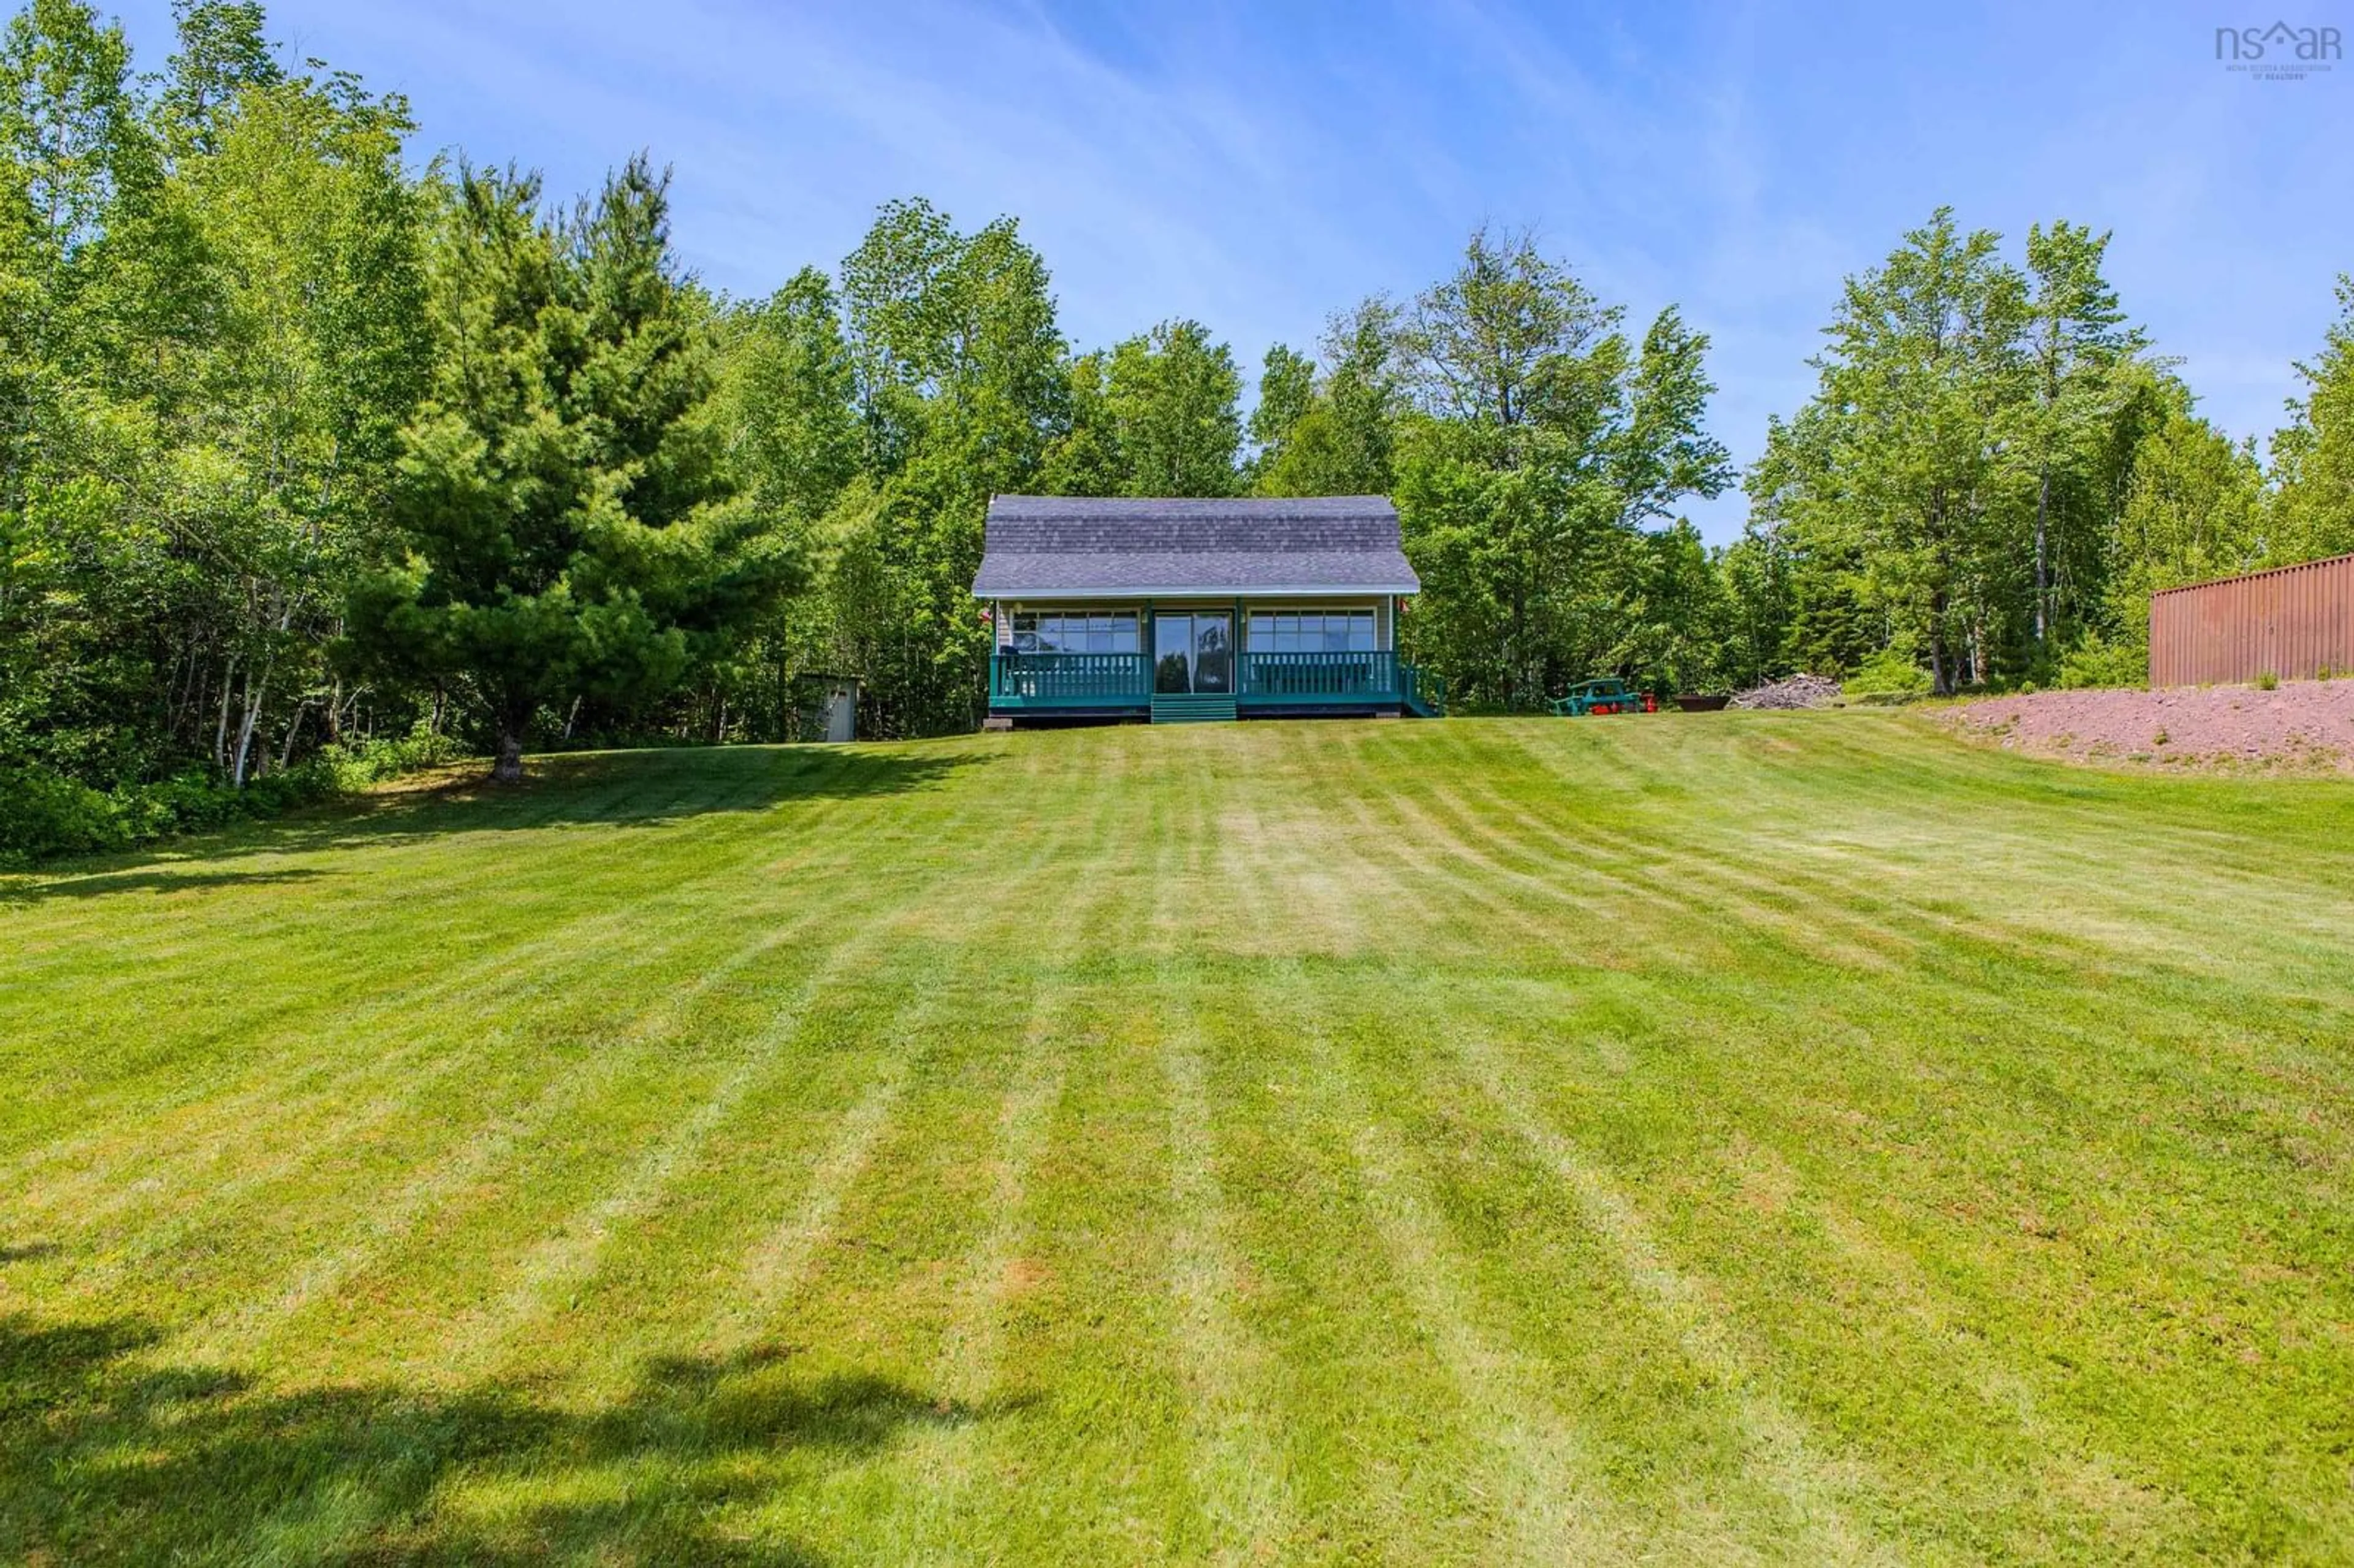 Cottage for 31 Bass Cove Rd, Wentworth Nova Scotia B0M 1Z0